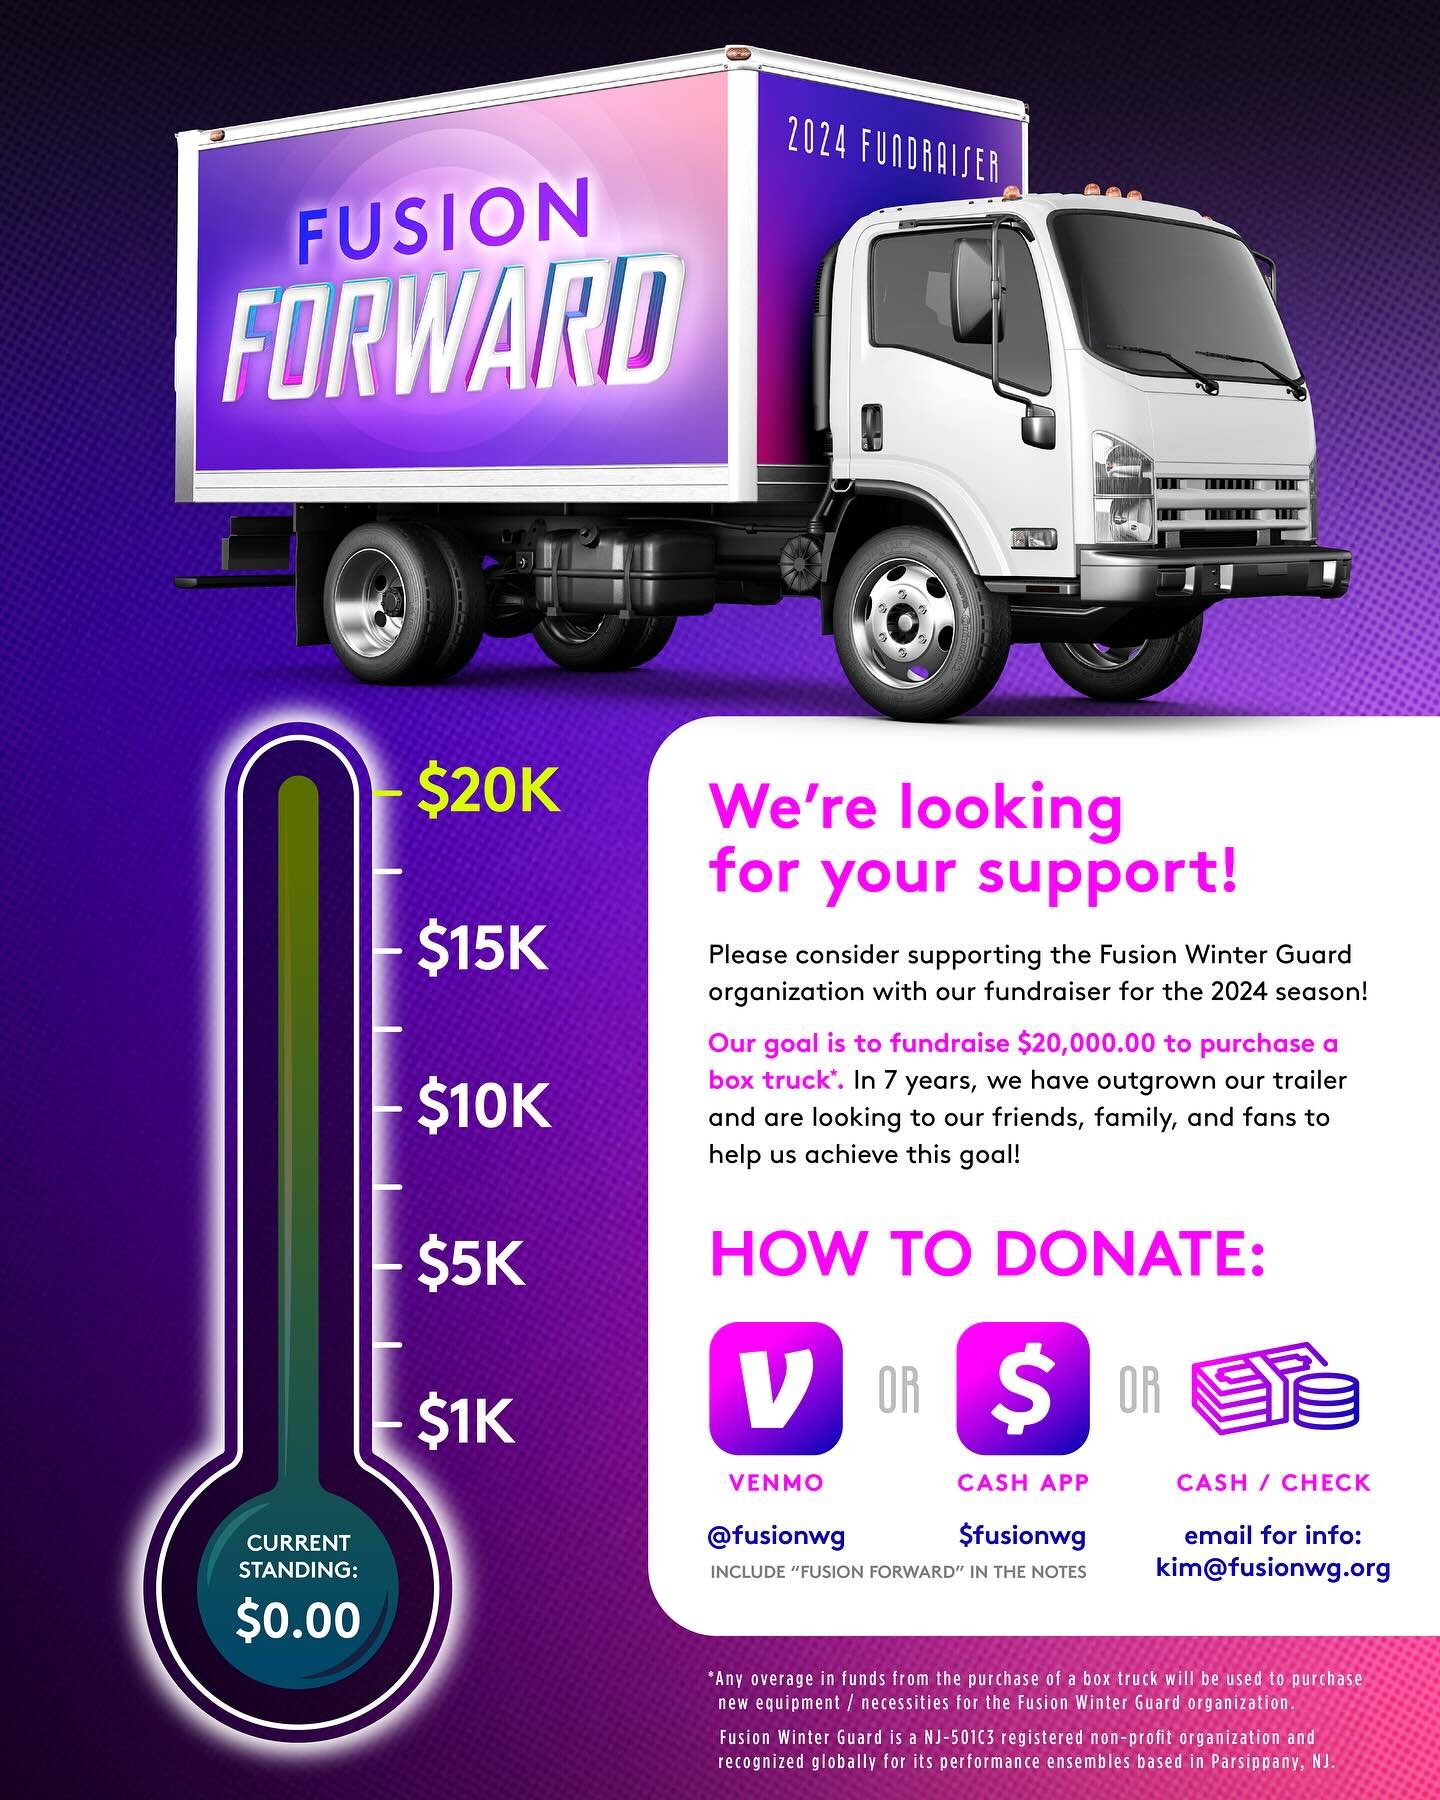 It's time for our first large fundraiser this year! We are hoping to purchase a new box truck to replace our current trailer &ndash; and we are looking to our friends, families, and fans for support!

The funds we raise will go directly to the expens